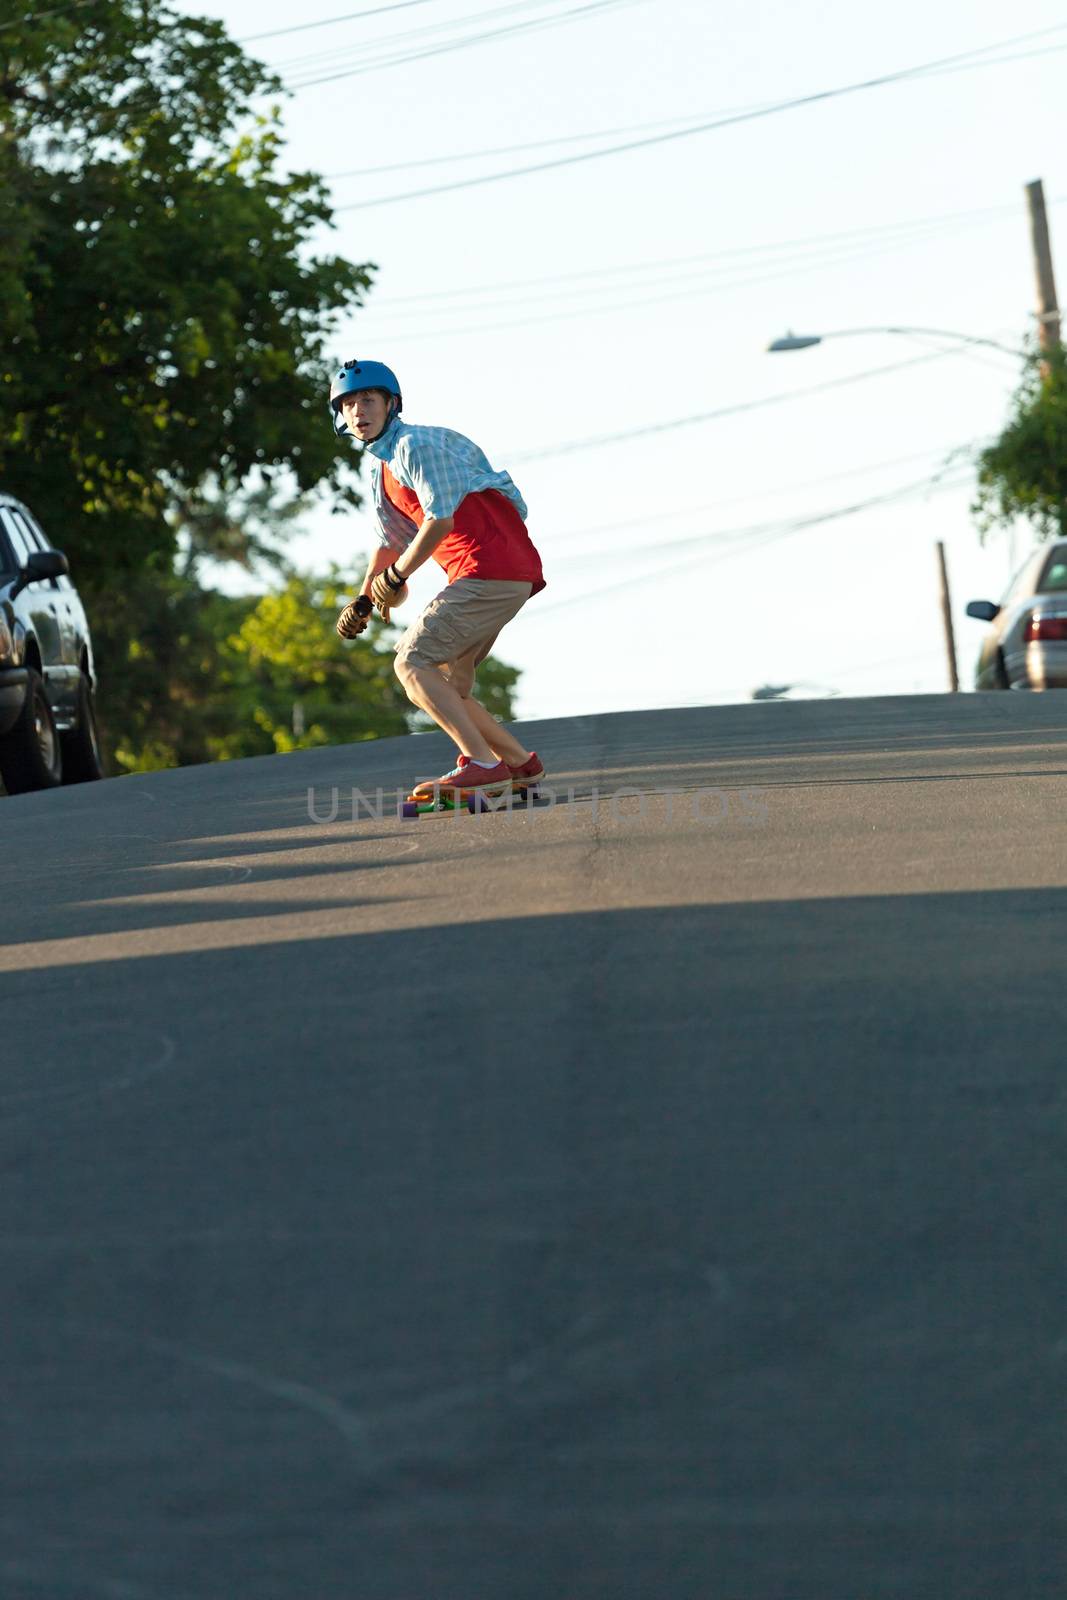 Action shot of a longboarder skating on a suburban road.